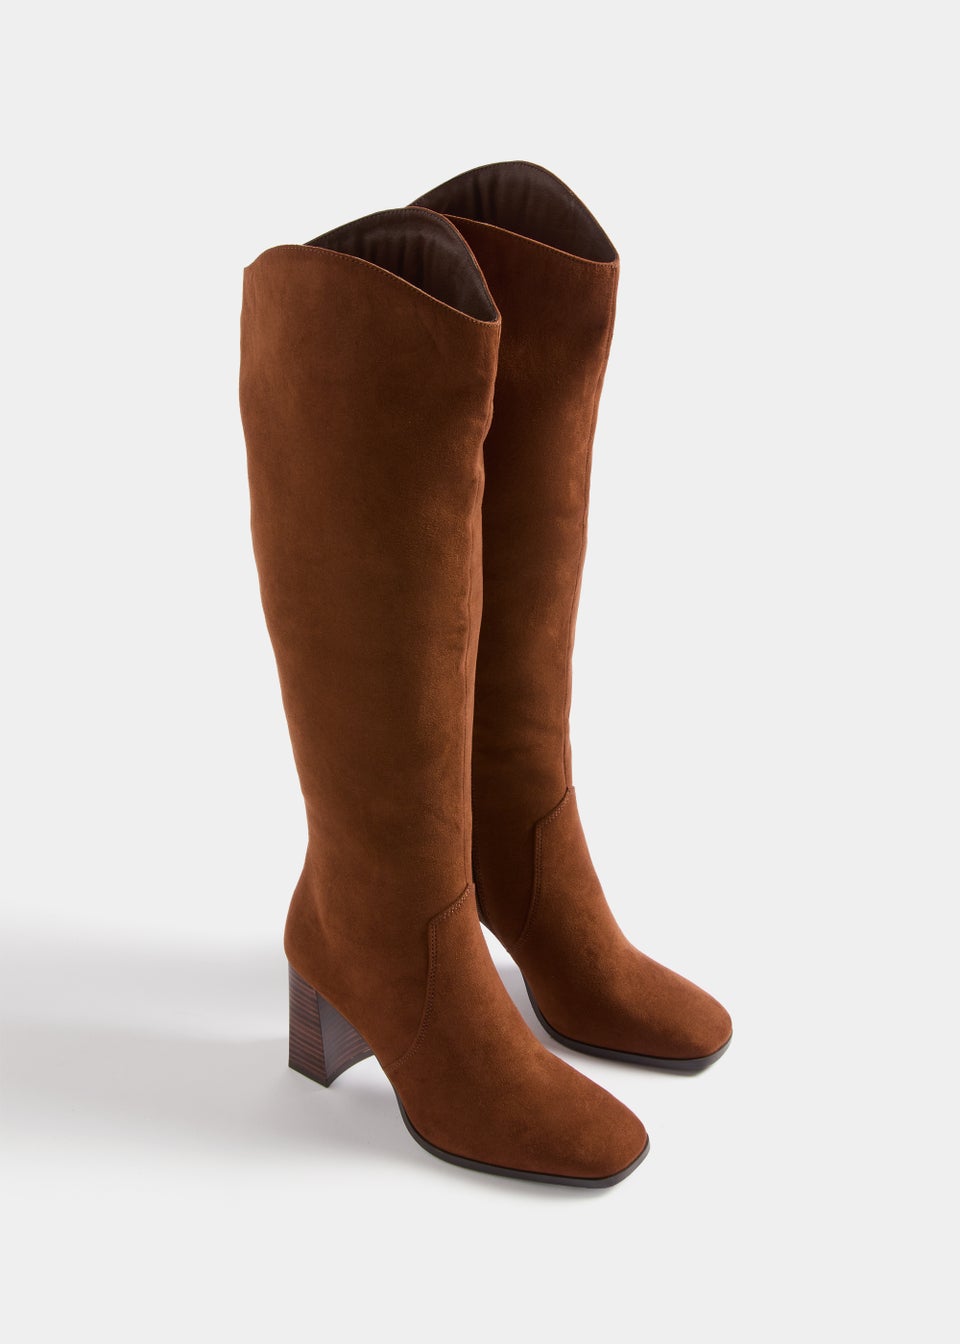 Et Vous Brown Knee High Boots